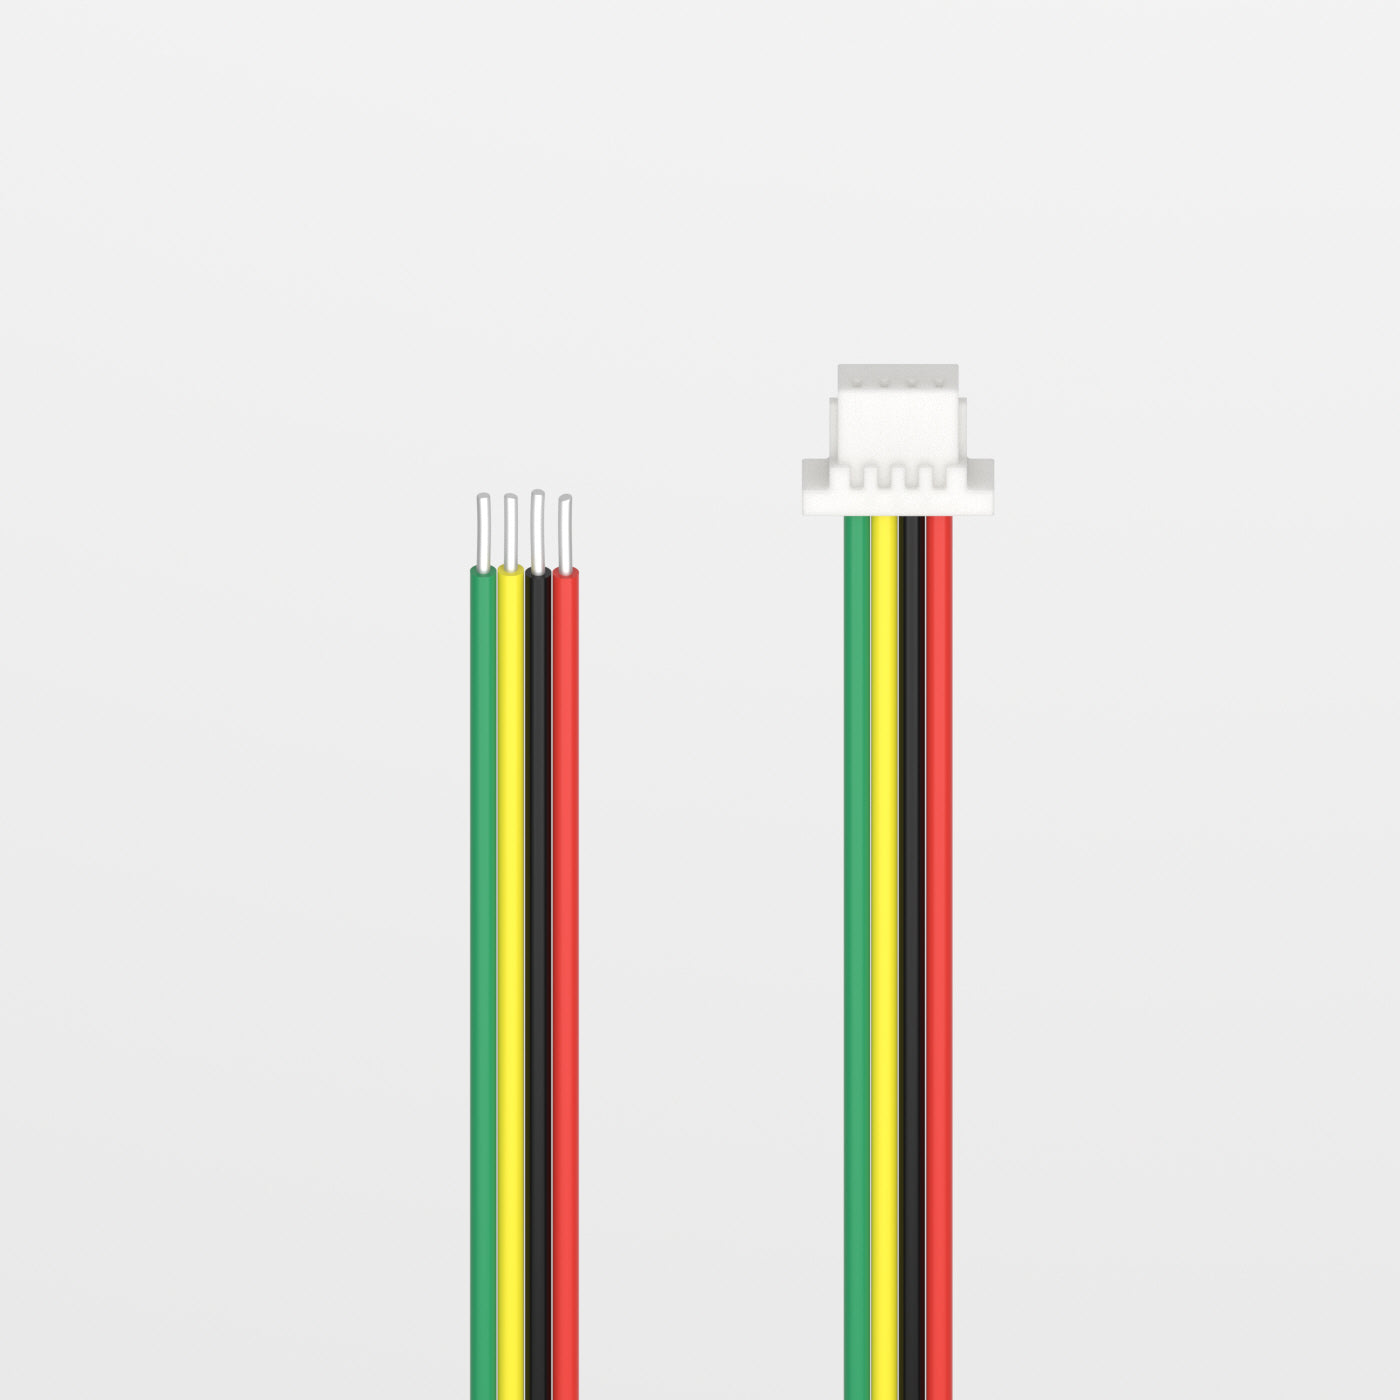 JST-SH 1.0mm 4 pin cable